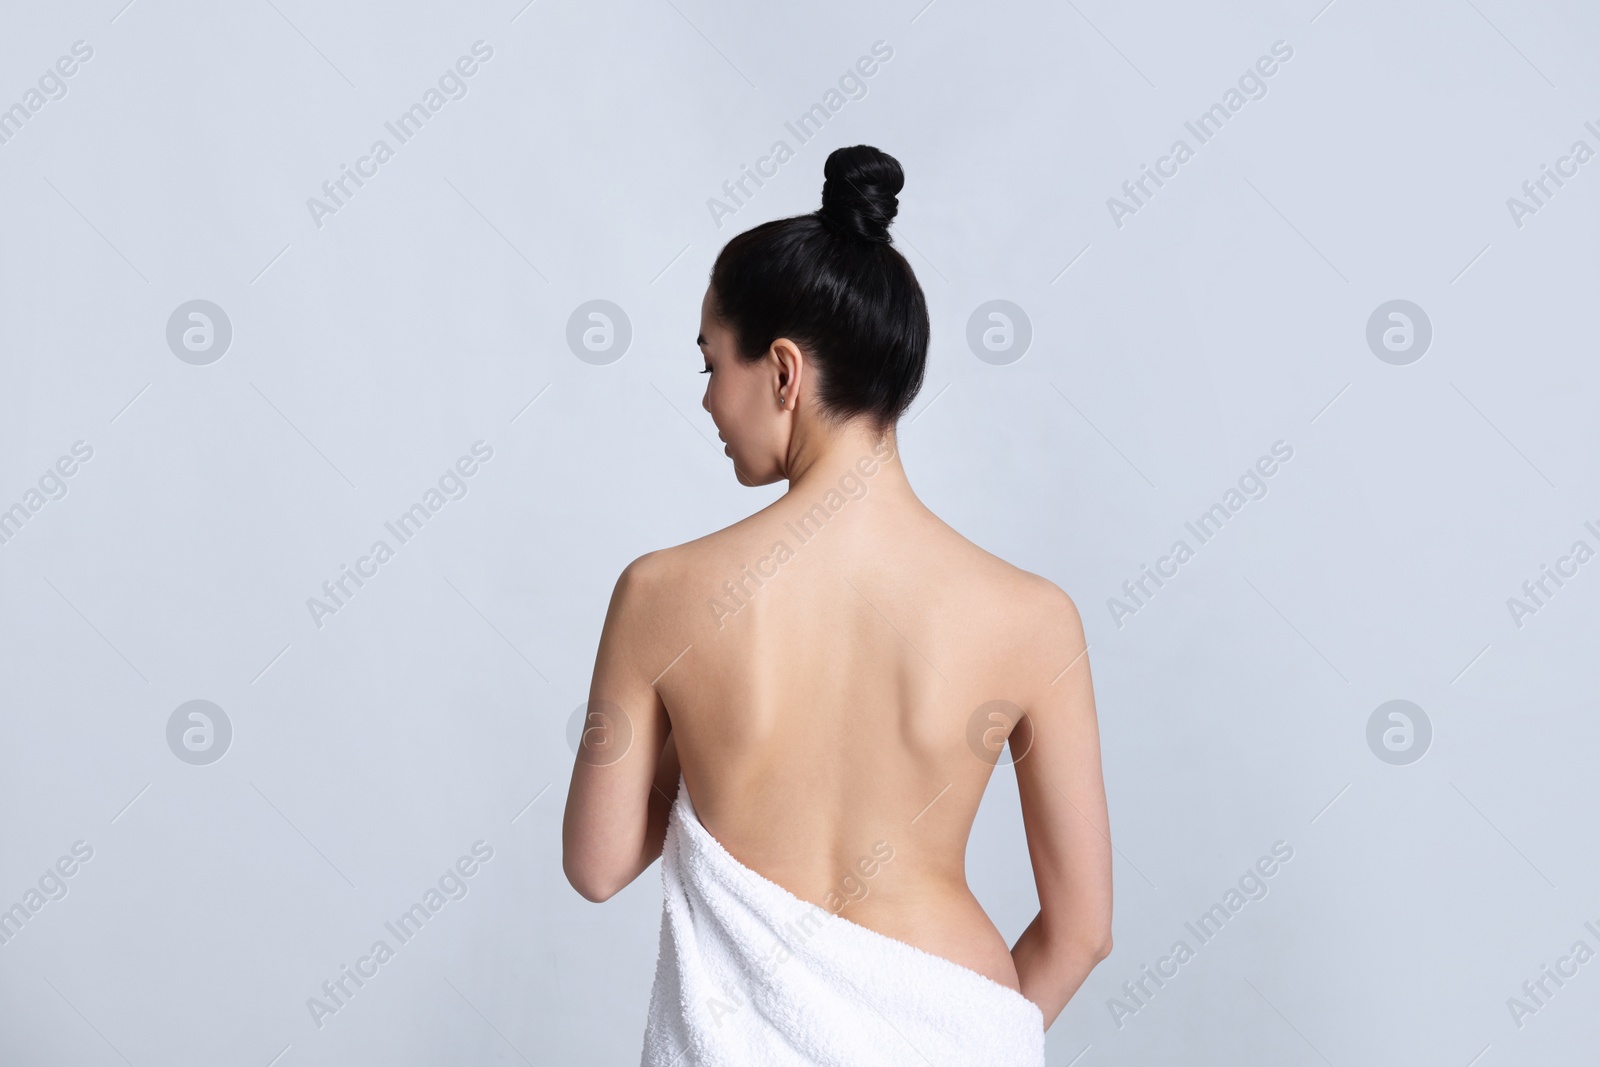 Photo of Back view of woman with perfect smooth skin on light background